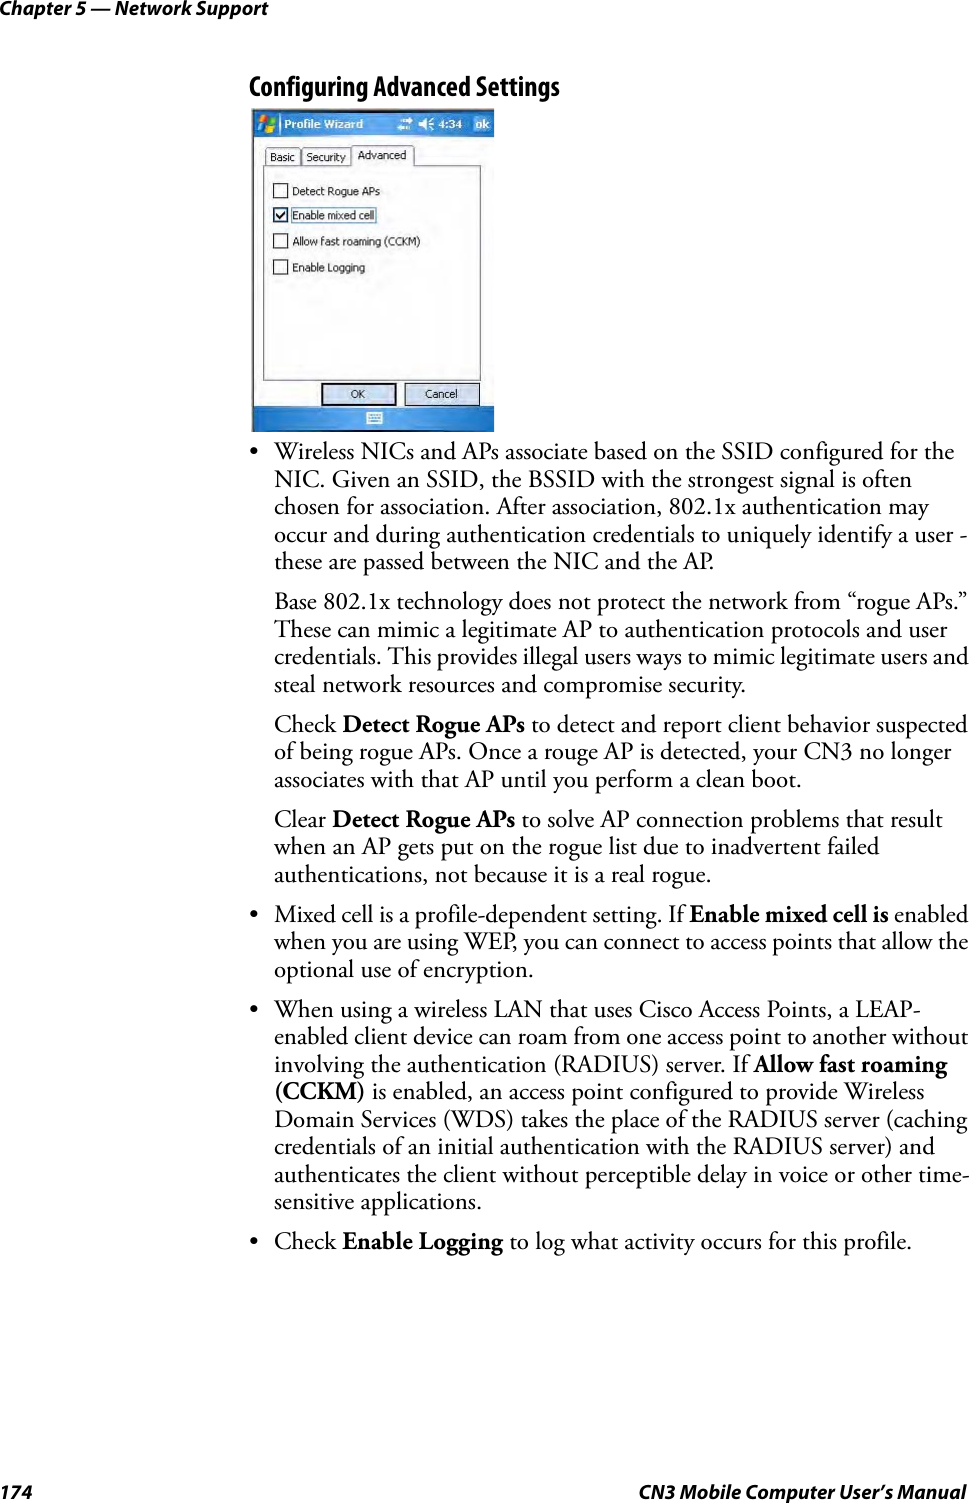 Chapter 5 — Network Support174 CN3 Mobile Computer User’s ManualConfiguring Advanced Settings• Wireless NICs and APs associate based on the SSID configured for the NIC. Given an SSID, the BSSID with the strongest signal is often chosen for association. After association, 802.1x authentication may occur and during authentication credentials to uniquely identify a user - these are passed between the NIC and the AP.Base 802.1x technology does not protect the network from “rogue APs.” These can mimic a legitimate AP to authentication protocols and user credentials. This provides illegal users ways to mimic legitimate users and steal network resources and compromise security.Check Detect Rogue APs to detect and report client behavior suspected of being rogue APs. Once a rouge AP is detected, your CN3 no longer associates with that AP until you perform a clean boot.Clear Detect Rogue APs to solve AP connection problems that result when an AP gets put on the rogue list due to inadvertent failed authentications, not because it is a real rogue.• Mixed cell is a profile-dependent setting. If Enable mixed cell is enabled when you are using WEP, you can connect to access points that allow the optional use of encryption.• When using a wireless LAN that uses Cisco Access Points, a LEAP-enabled client device can roam from one access point to another without involving the authentication (RADIUS) server. If Allow fast roaming (CCKM) is enabled, an access point configured to provide Wireless Domain Services (WDS) takes the place of the RADIUS server (caching credentials of an initial authentication with the RADIUS server) and authenticates the client without perceptible delay in voice or other time-sensitive applications.• Check Enable Logging to log what activity occurs for this profile.